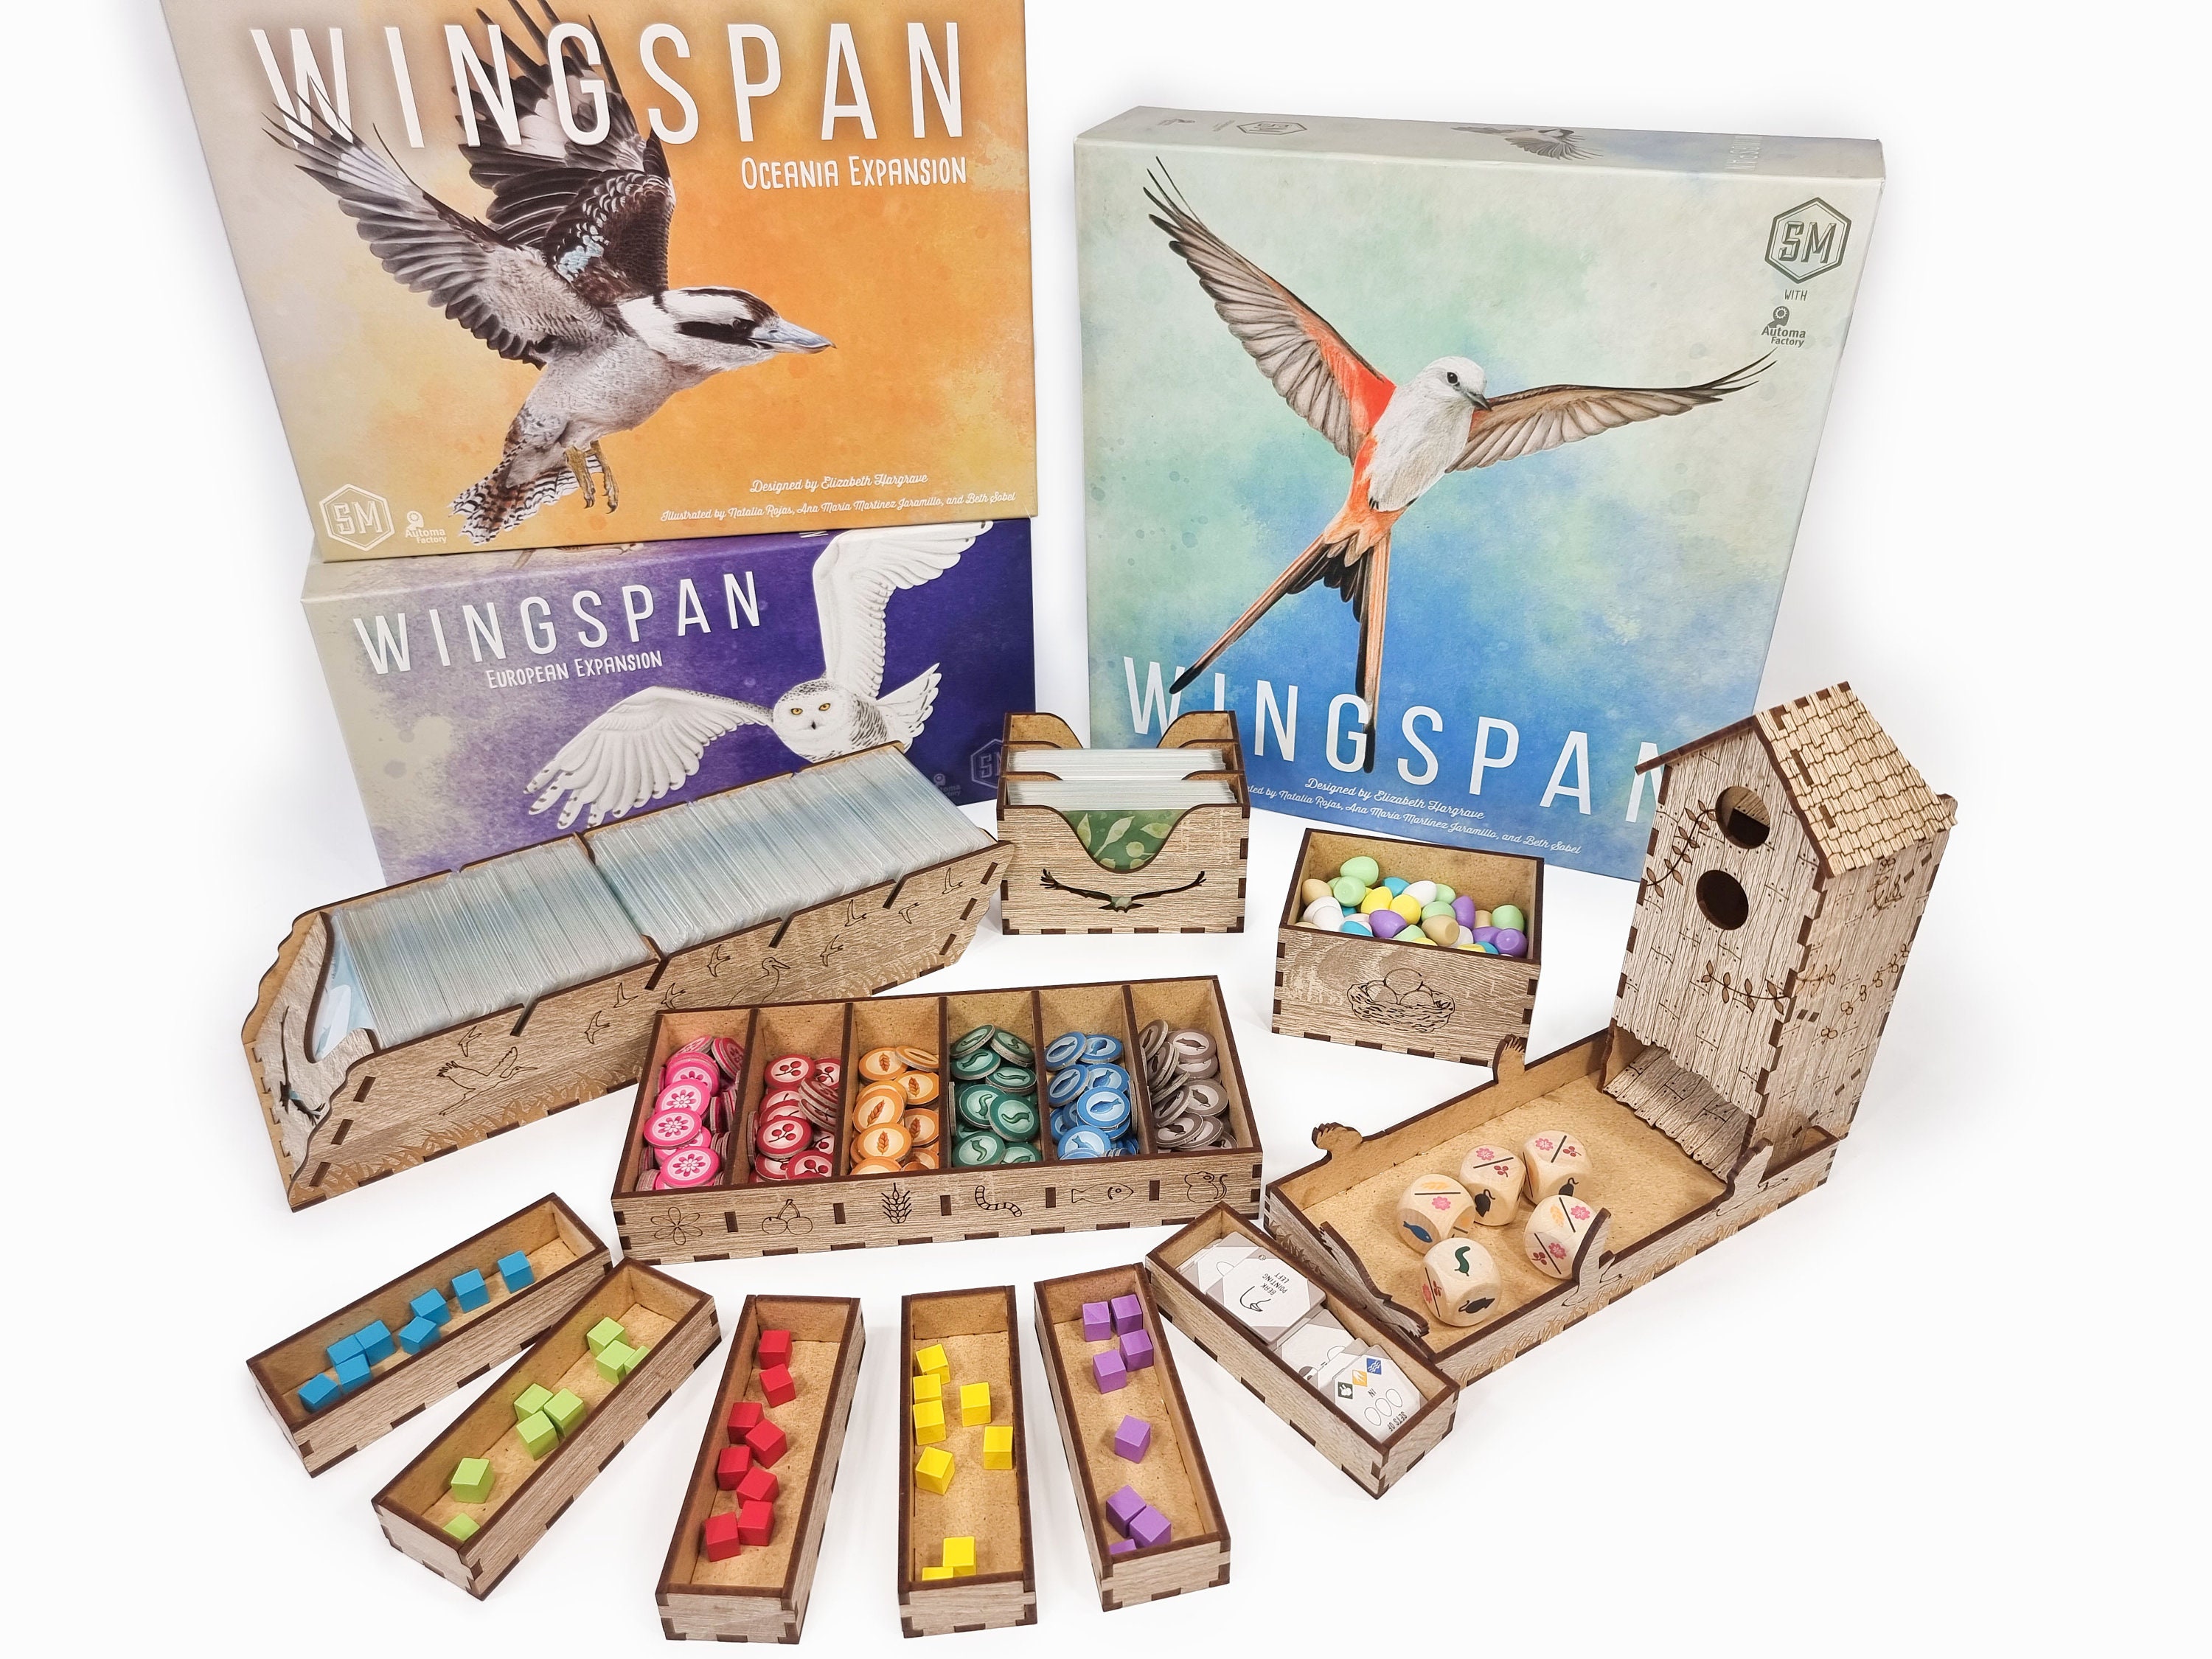 Wingspan Board game. Wingspan настольная игра. Wingspan Asia настольная игра. Asia expansion